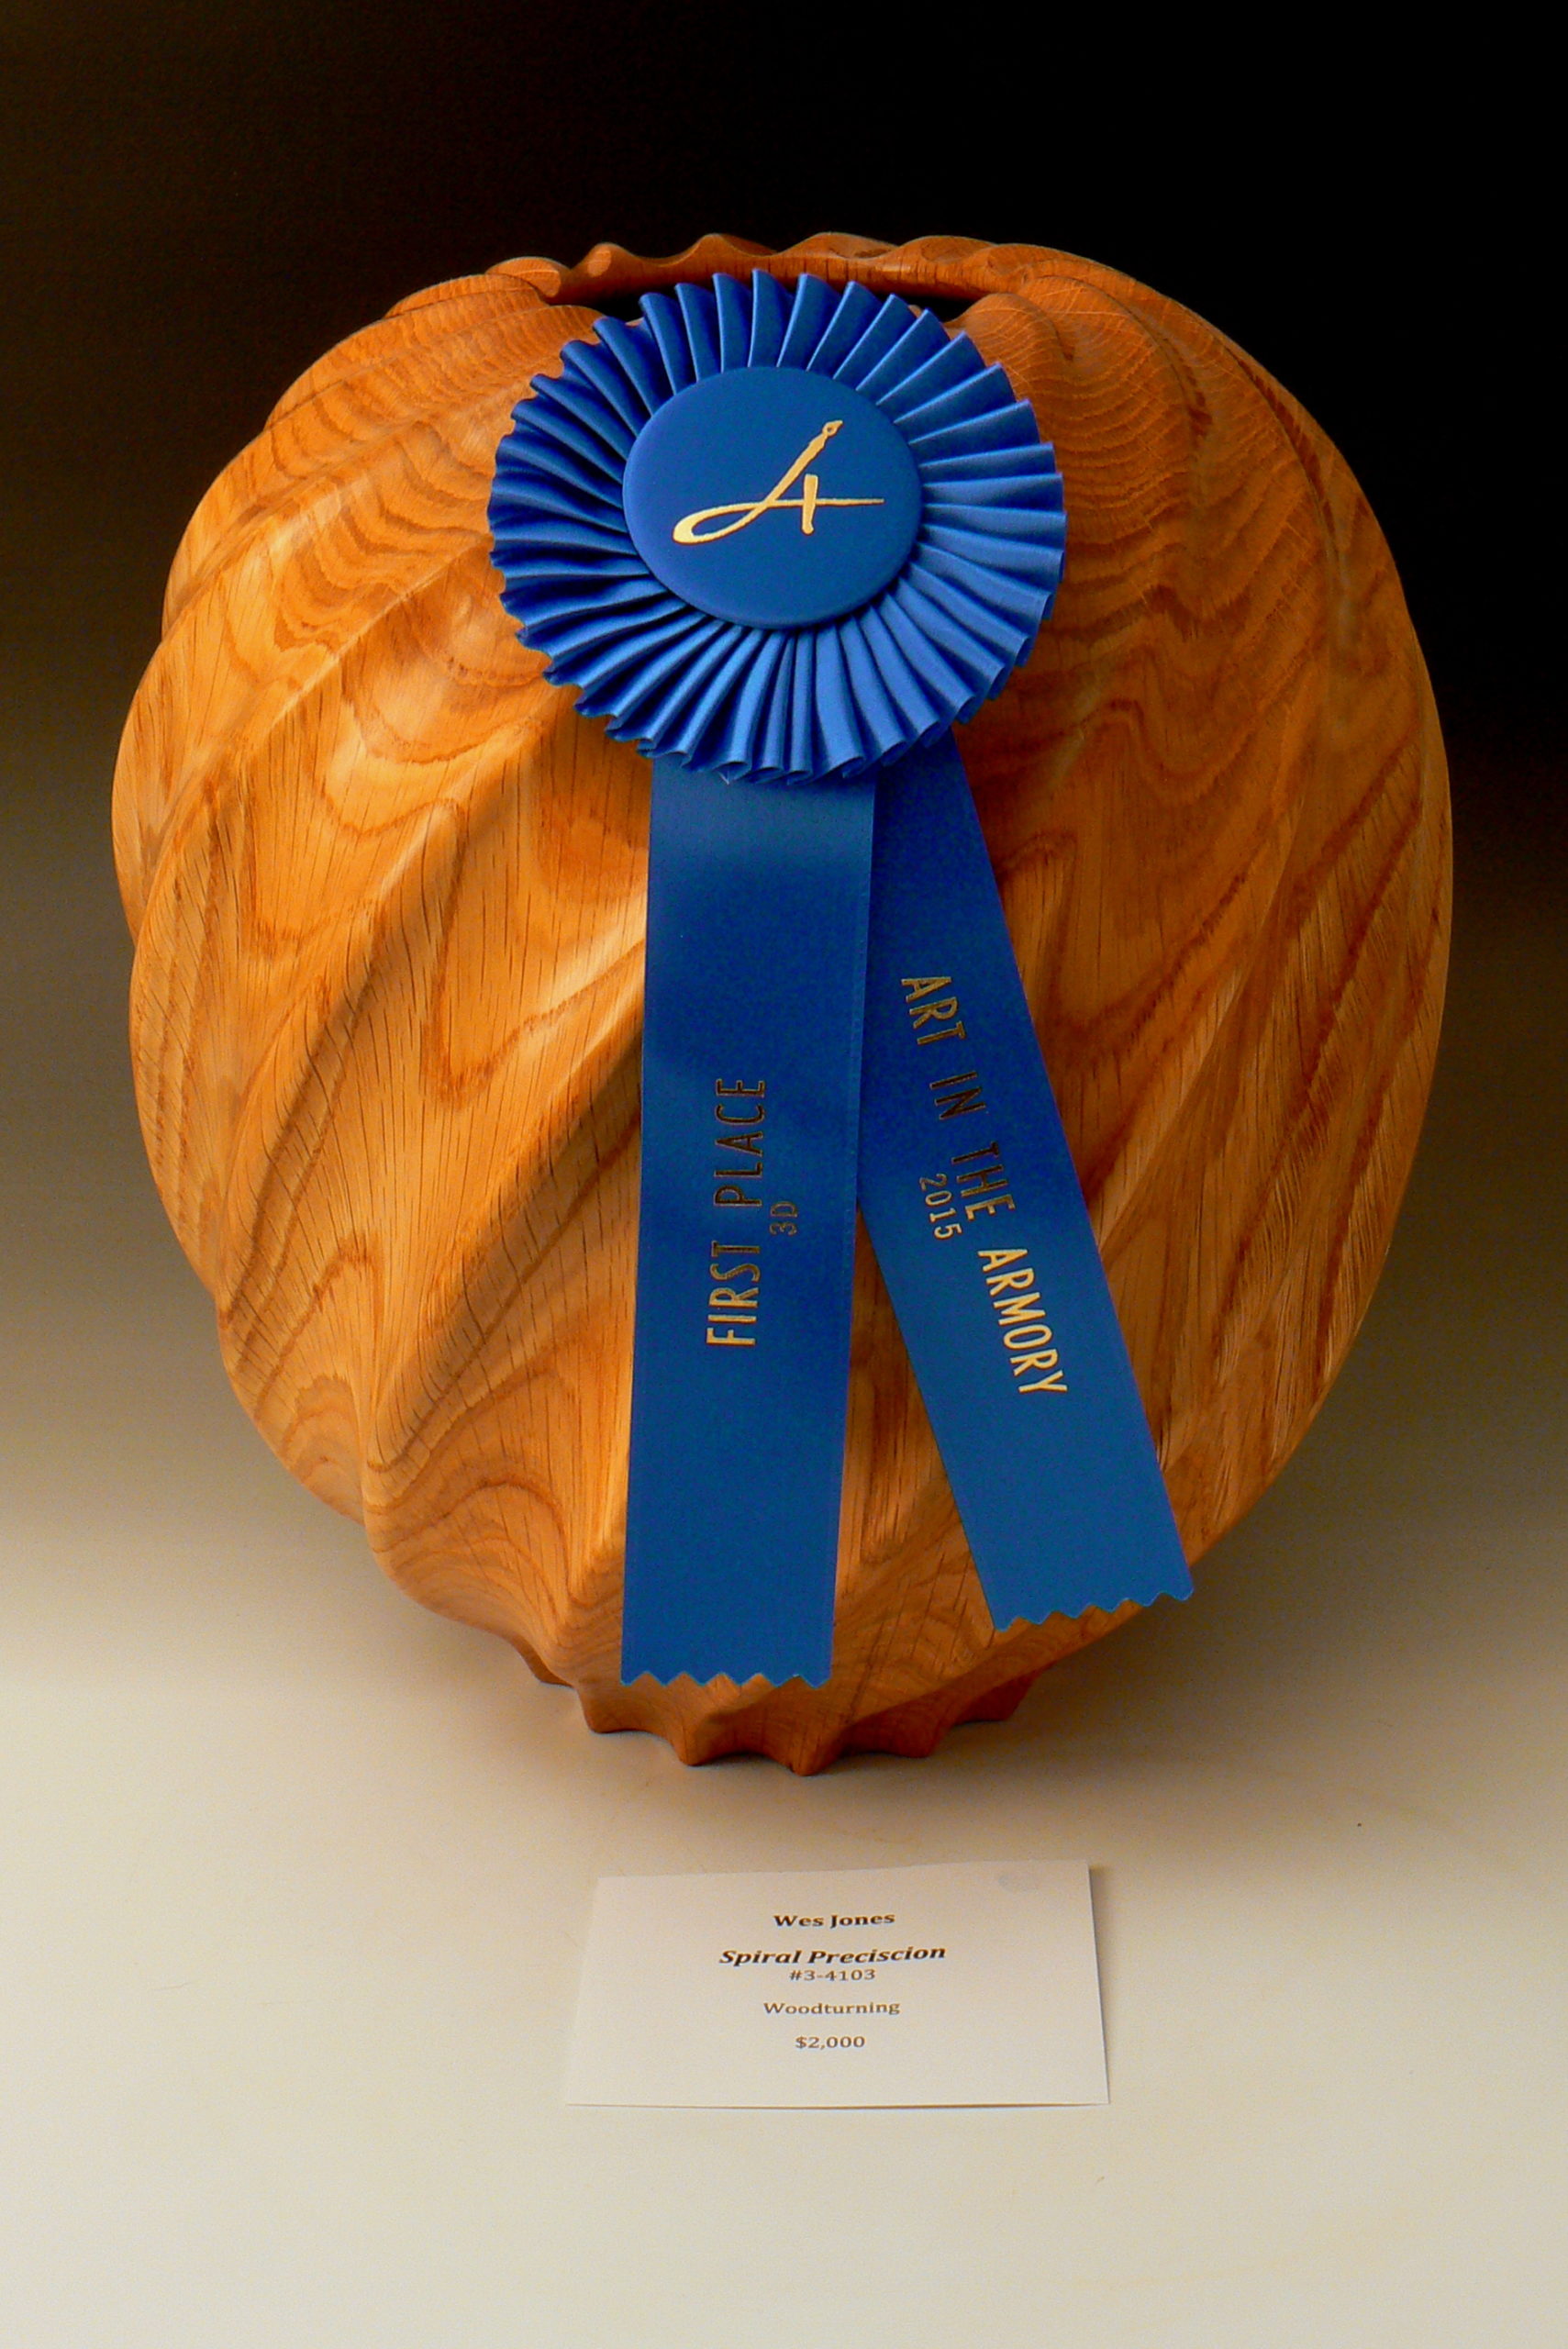 Woodturning Artistry